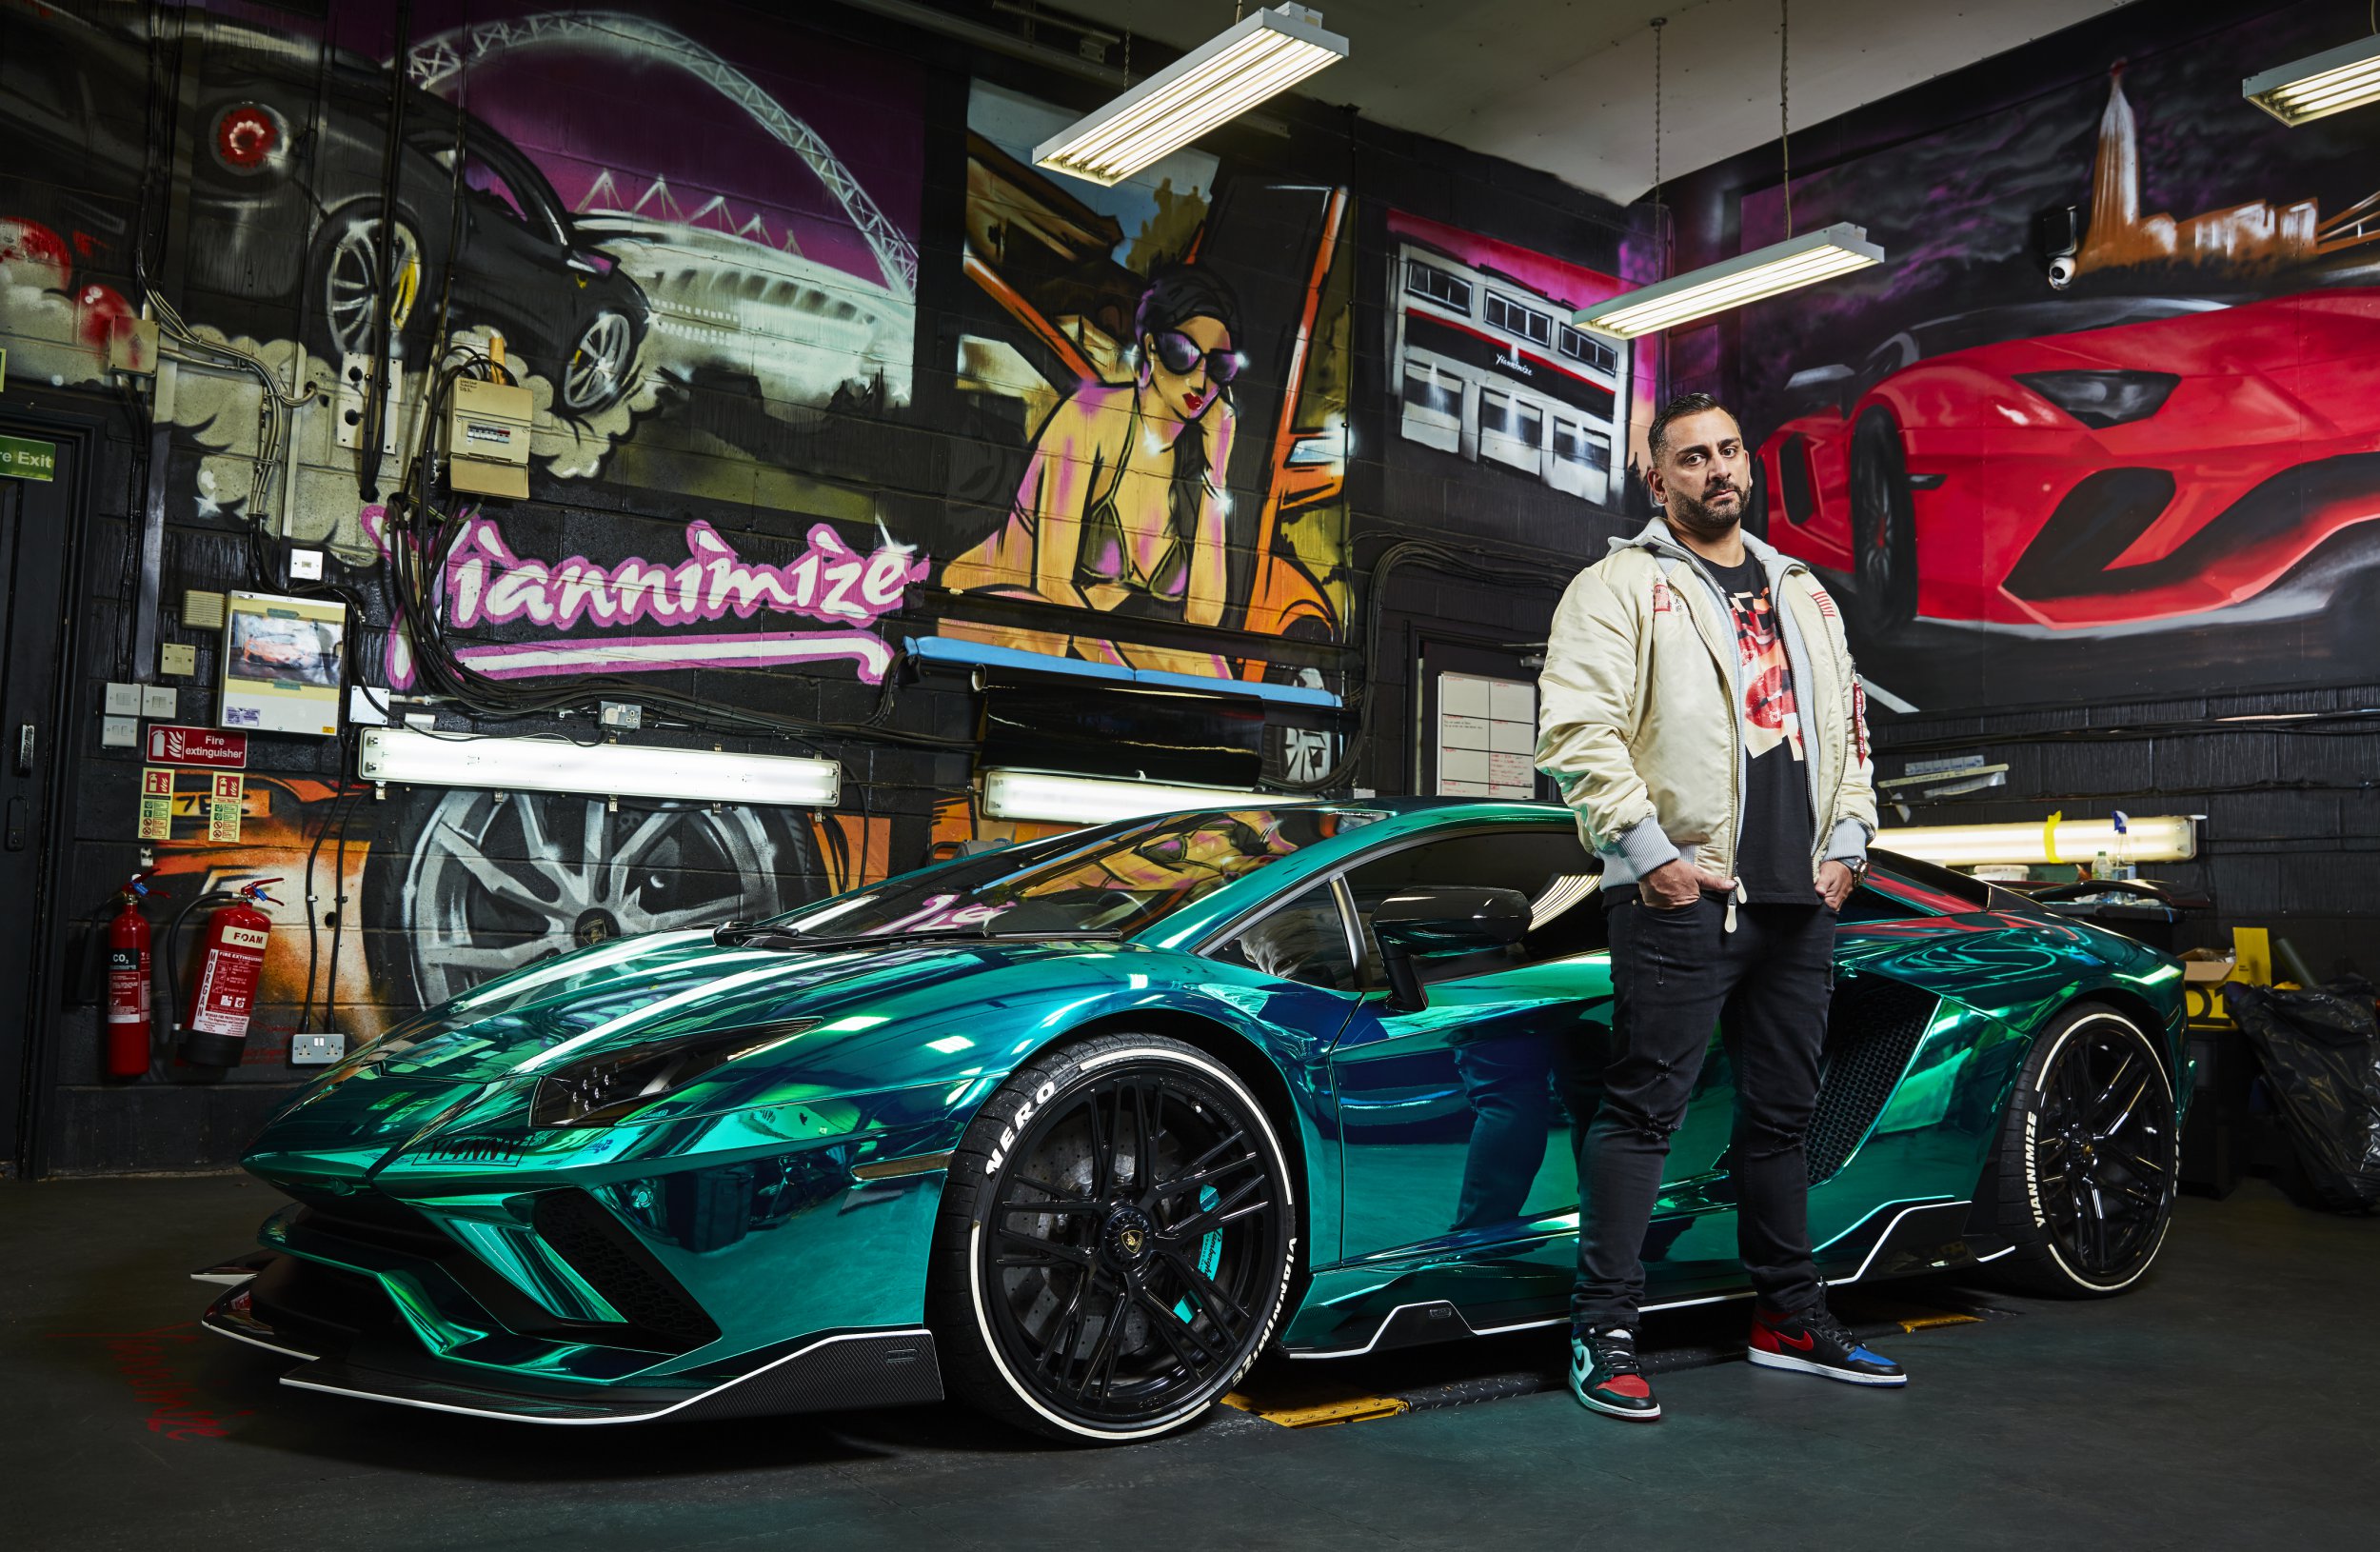 Yianni Charalambous has found fame through his work on luxury supercars